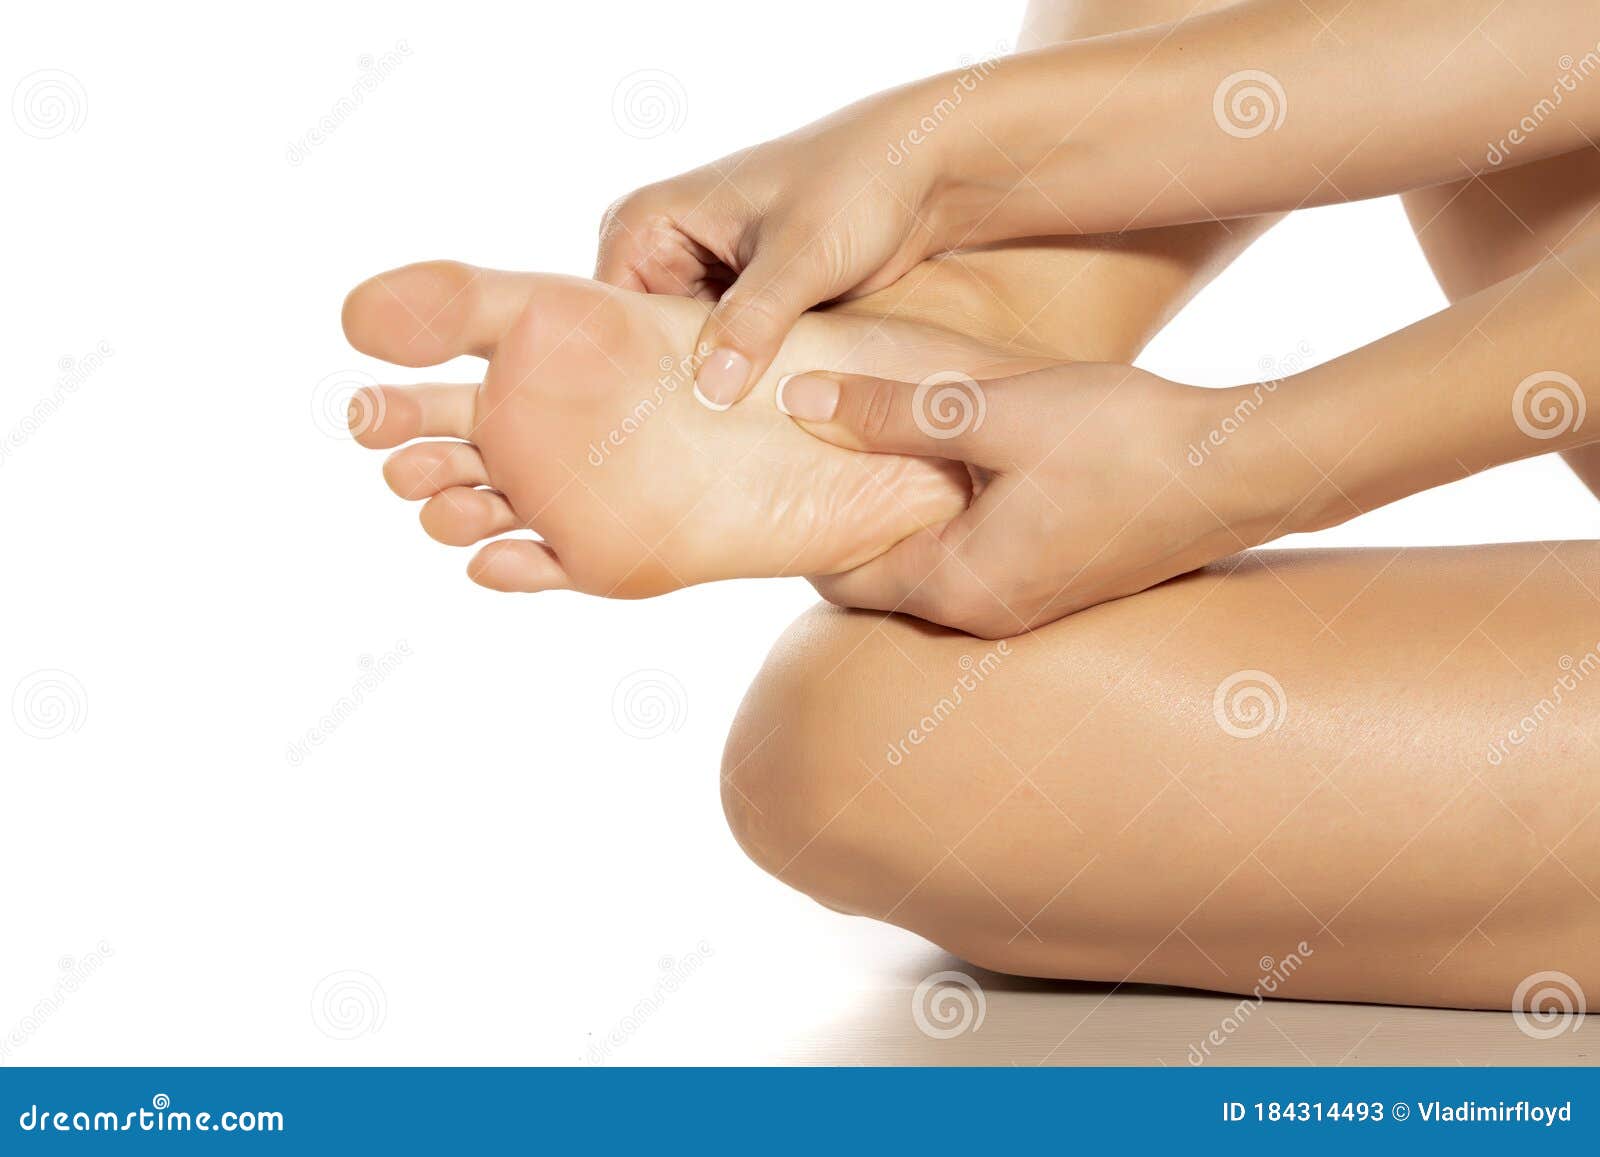 Woman Massaging Her Painful Foot On White Stock Image Image Of Feet